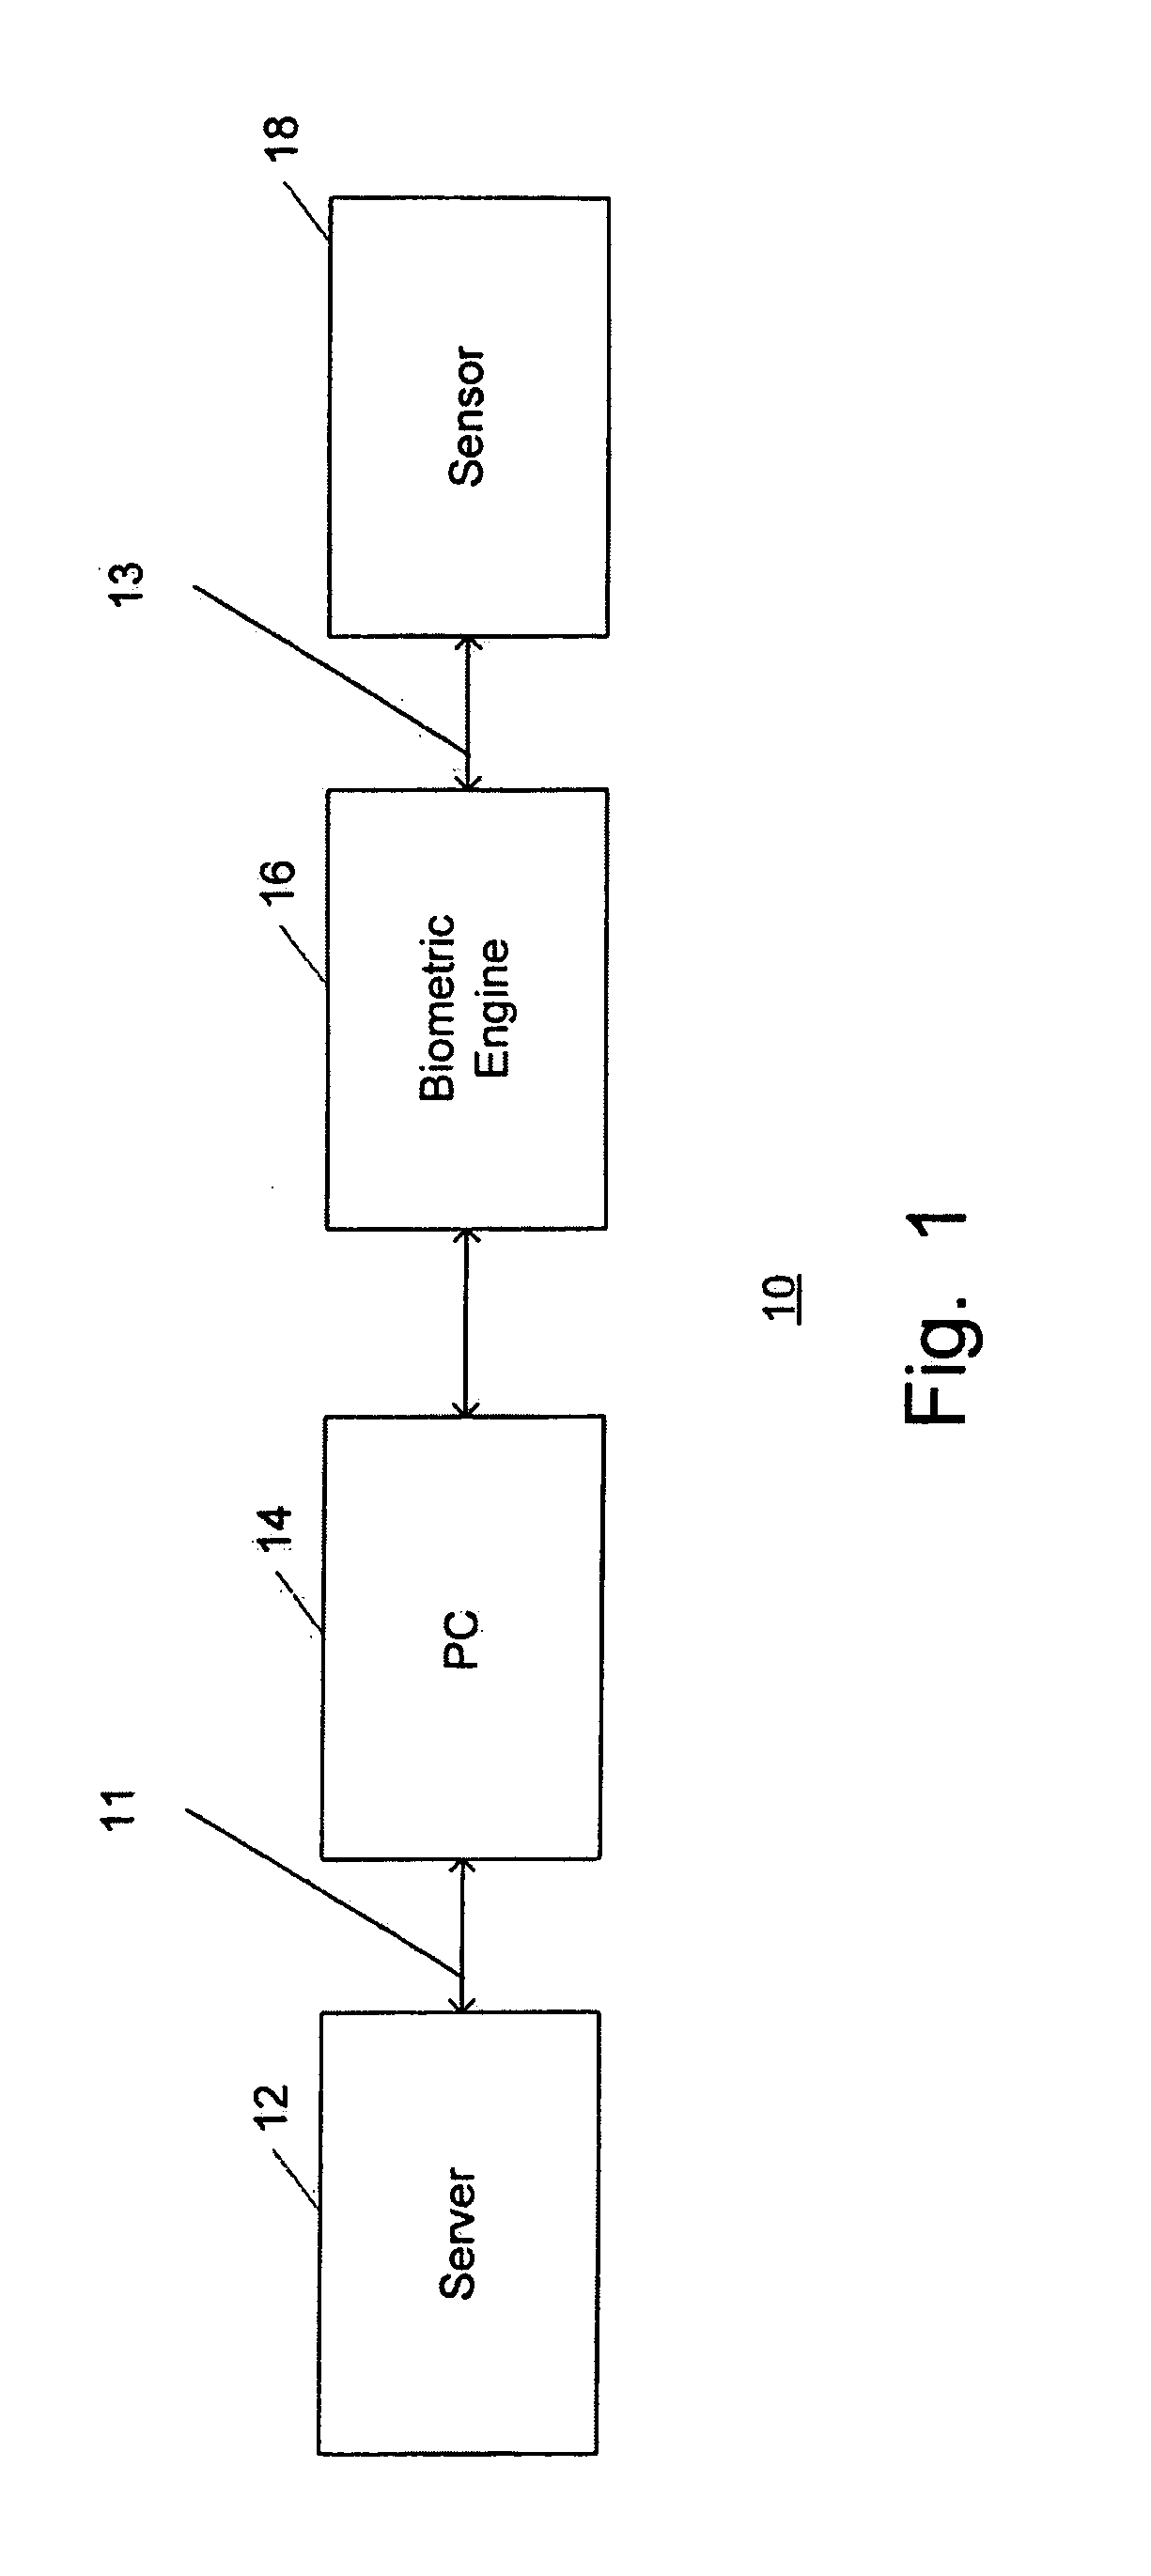 Secure biometric processing system and method of use